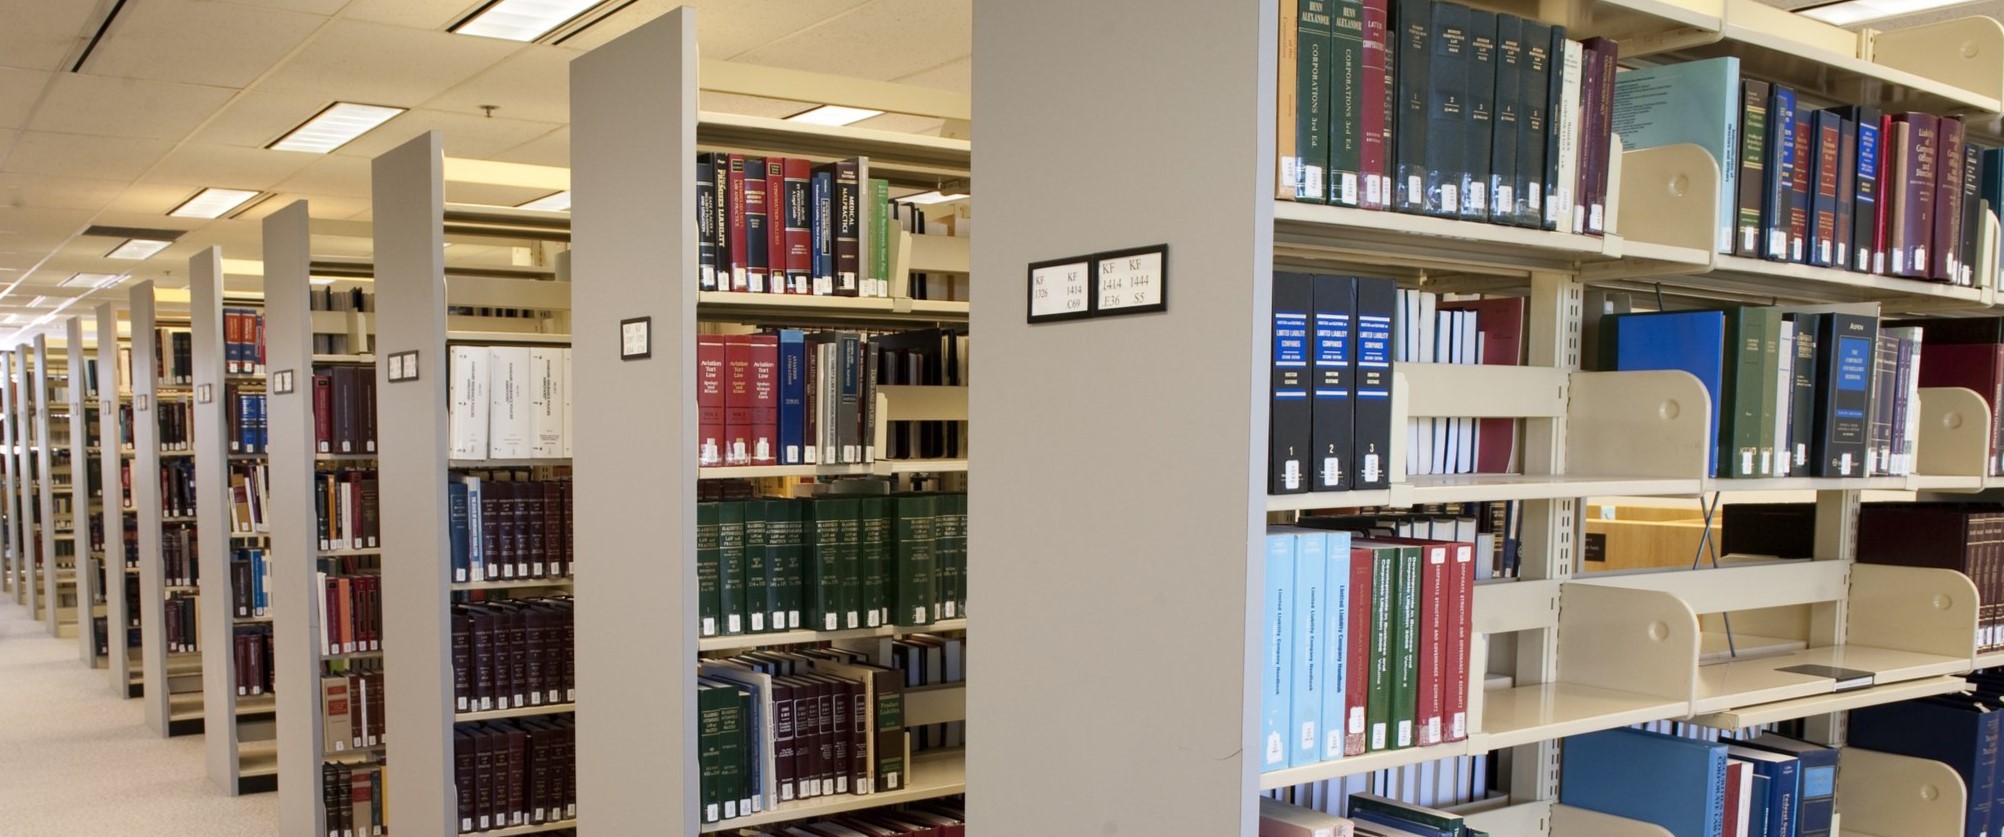 law library shelves